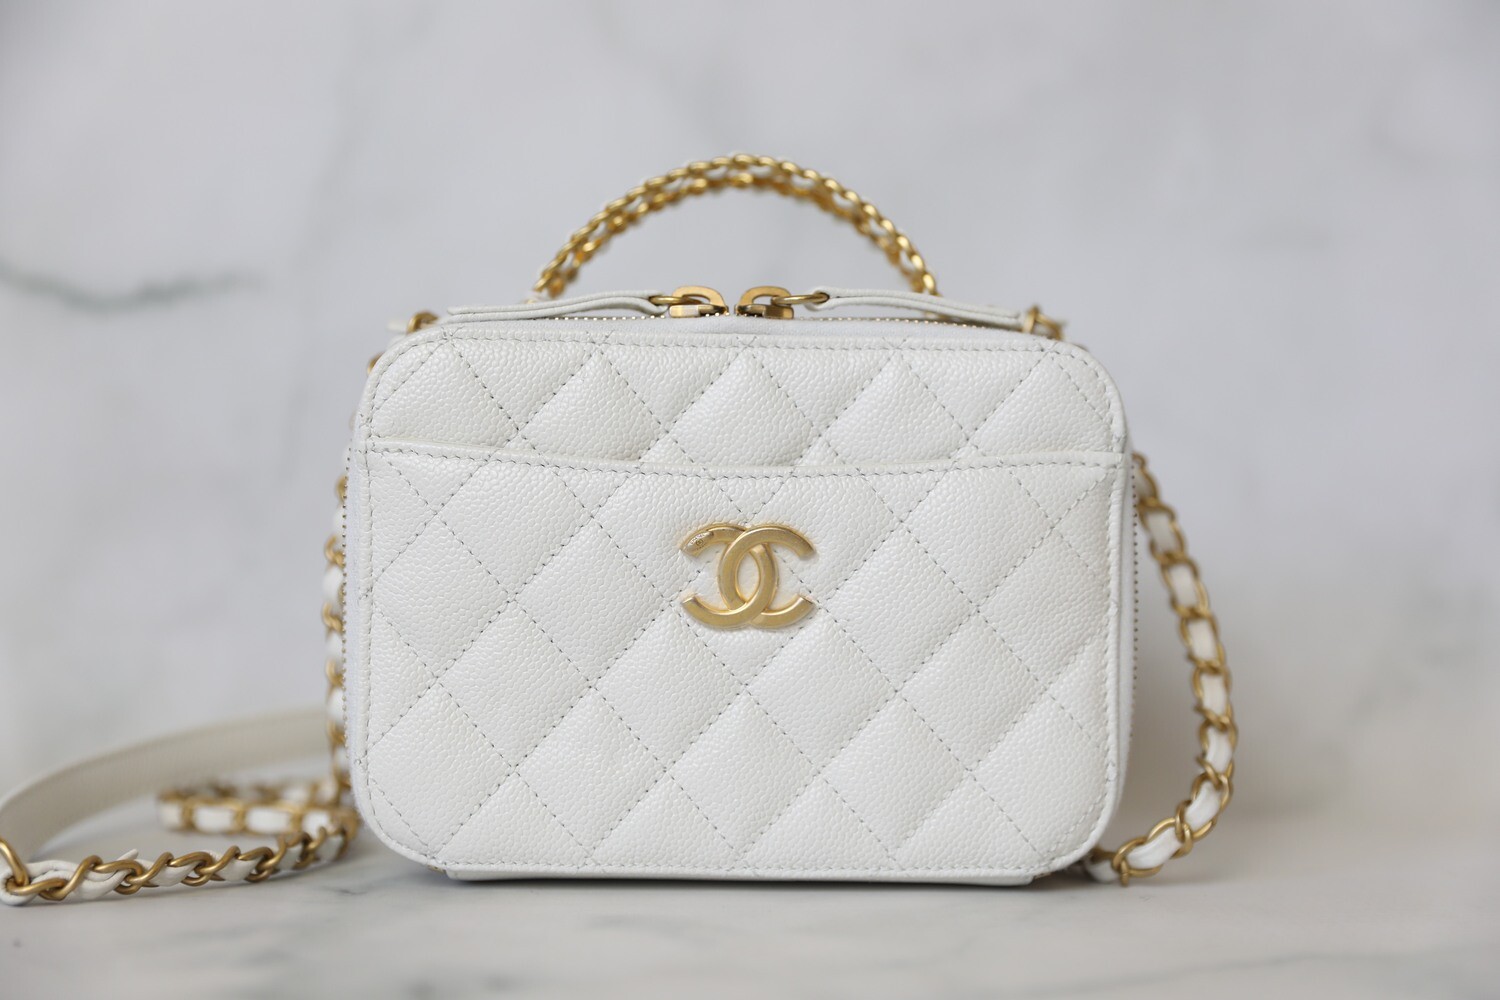 Chanel Pick Me Up Vanity Case Small, White Caviar with Gold